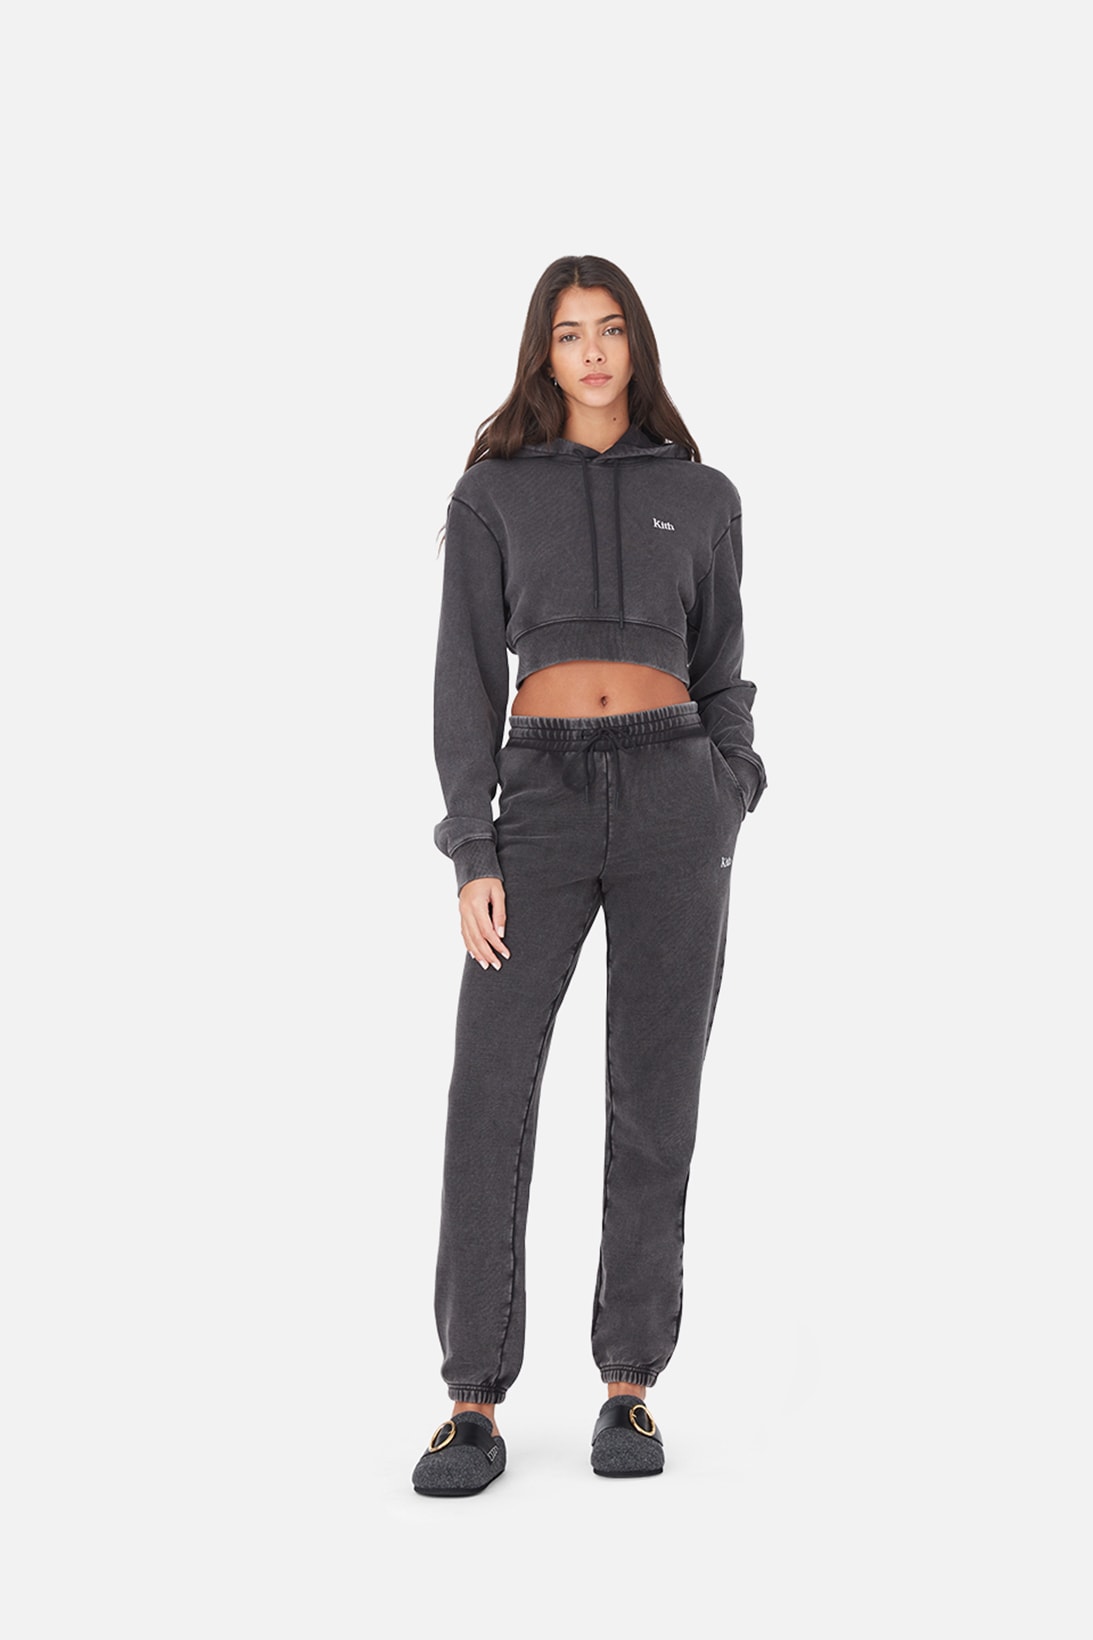 kith women winter collection outerwear jackets hoodies sweatpants 